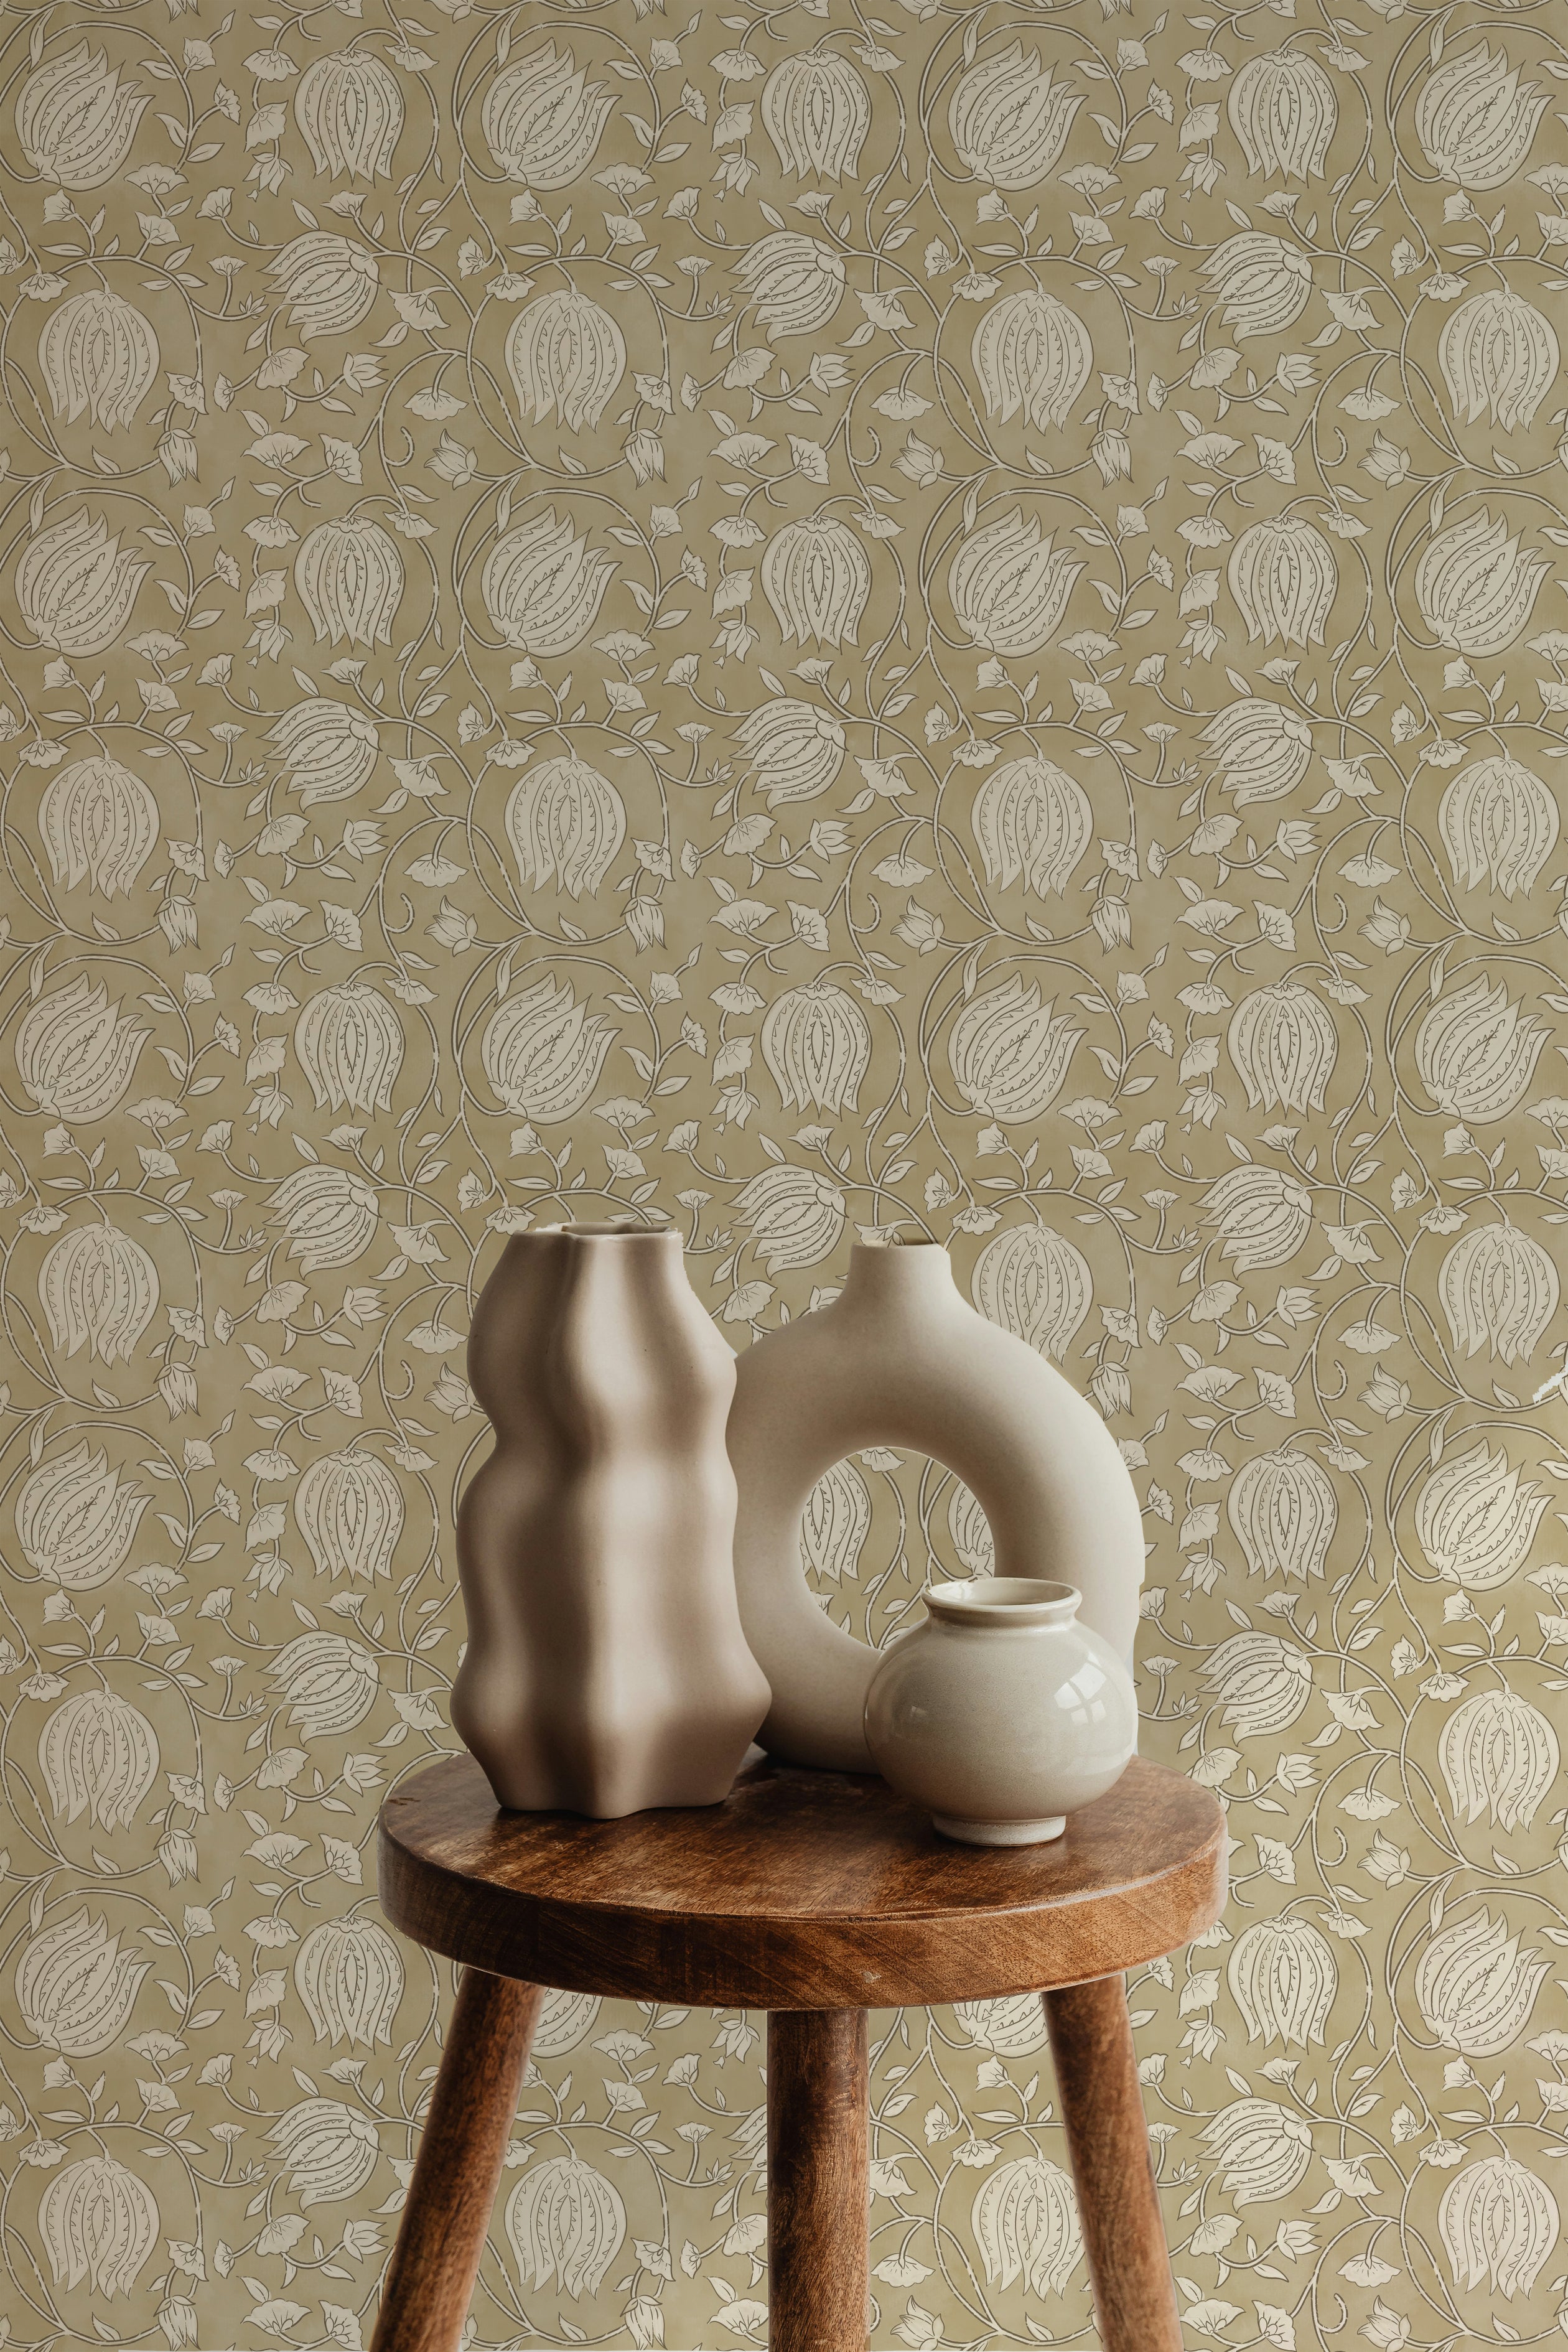 Artistic display against a mustard-colored Cornflower Wallpaper, showcasing an intricate design of beige and off-white floral motifs. The composition includes two unique ceramic vases on a rustic wooden stool, enhancing the vintage aesthetic of the space.